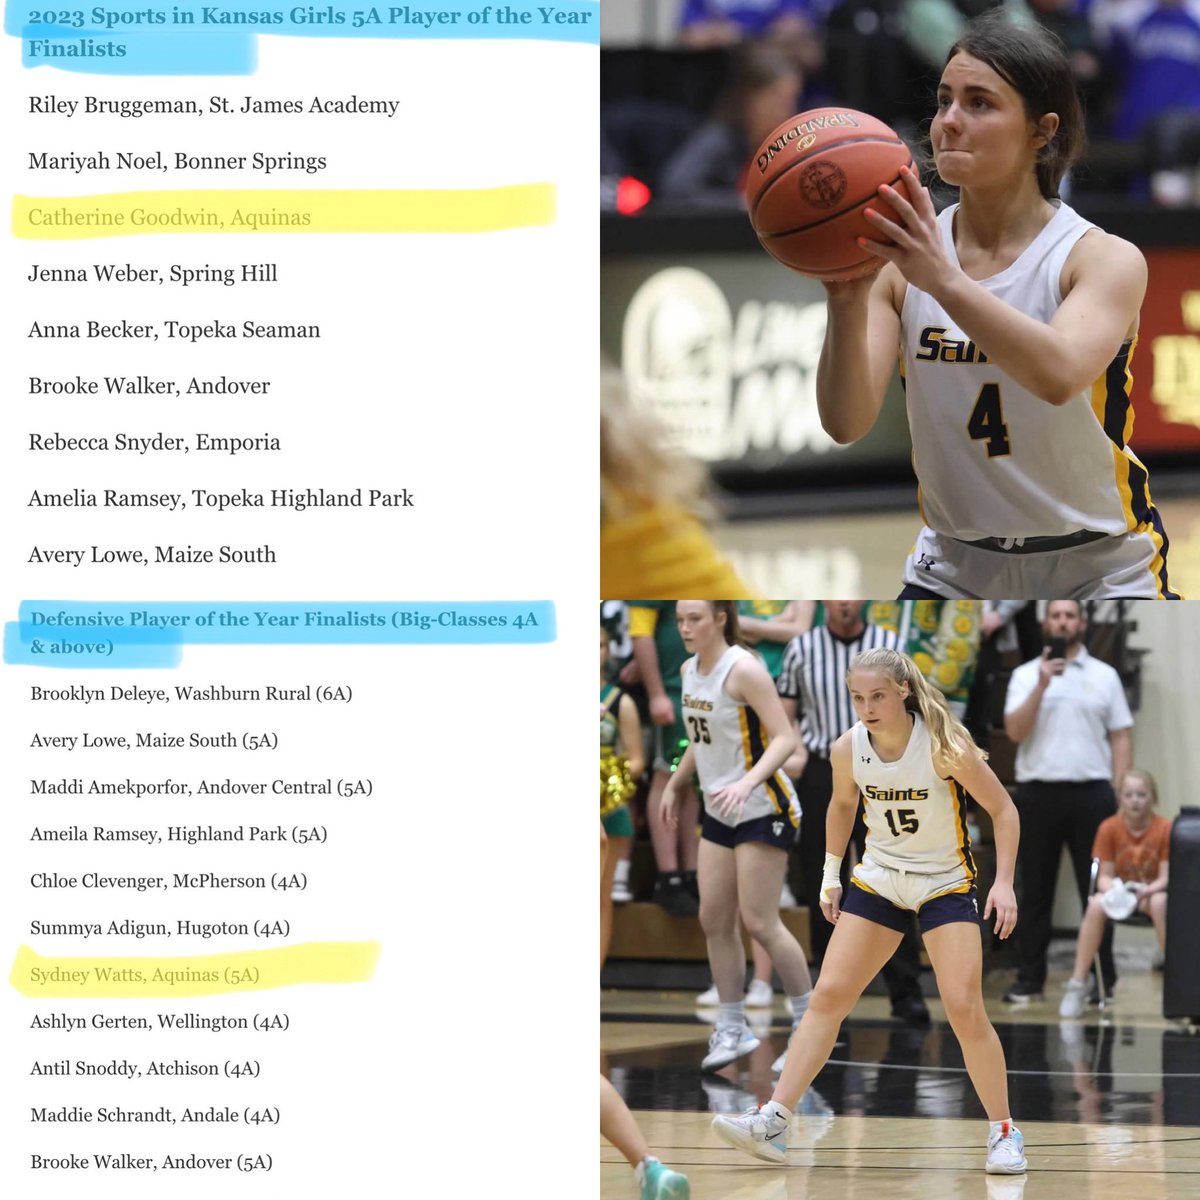 Awesome to see two of our players recognized as finalist for 5A player of the year and for Defensive player of the year! Way to go @sydneyw93240242 and @cgoodwin2023